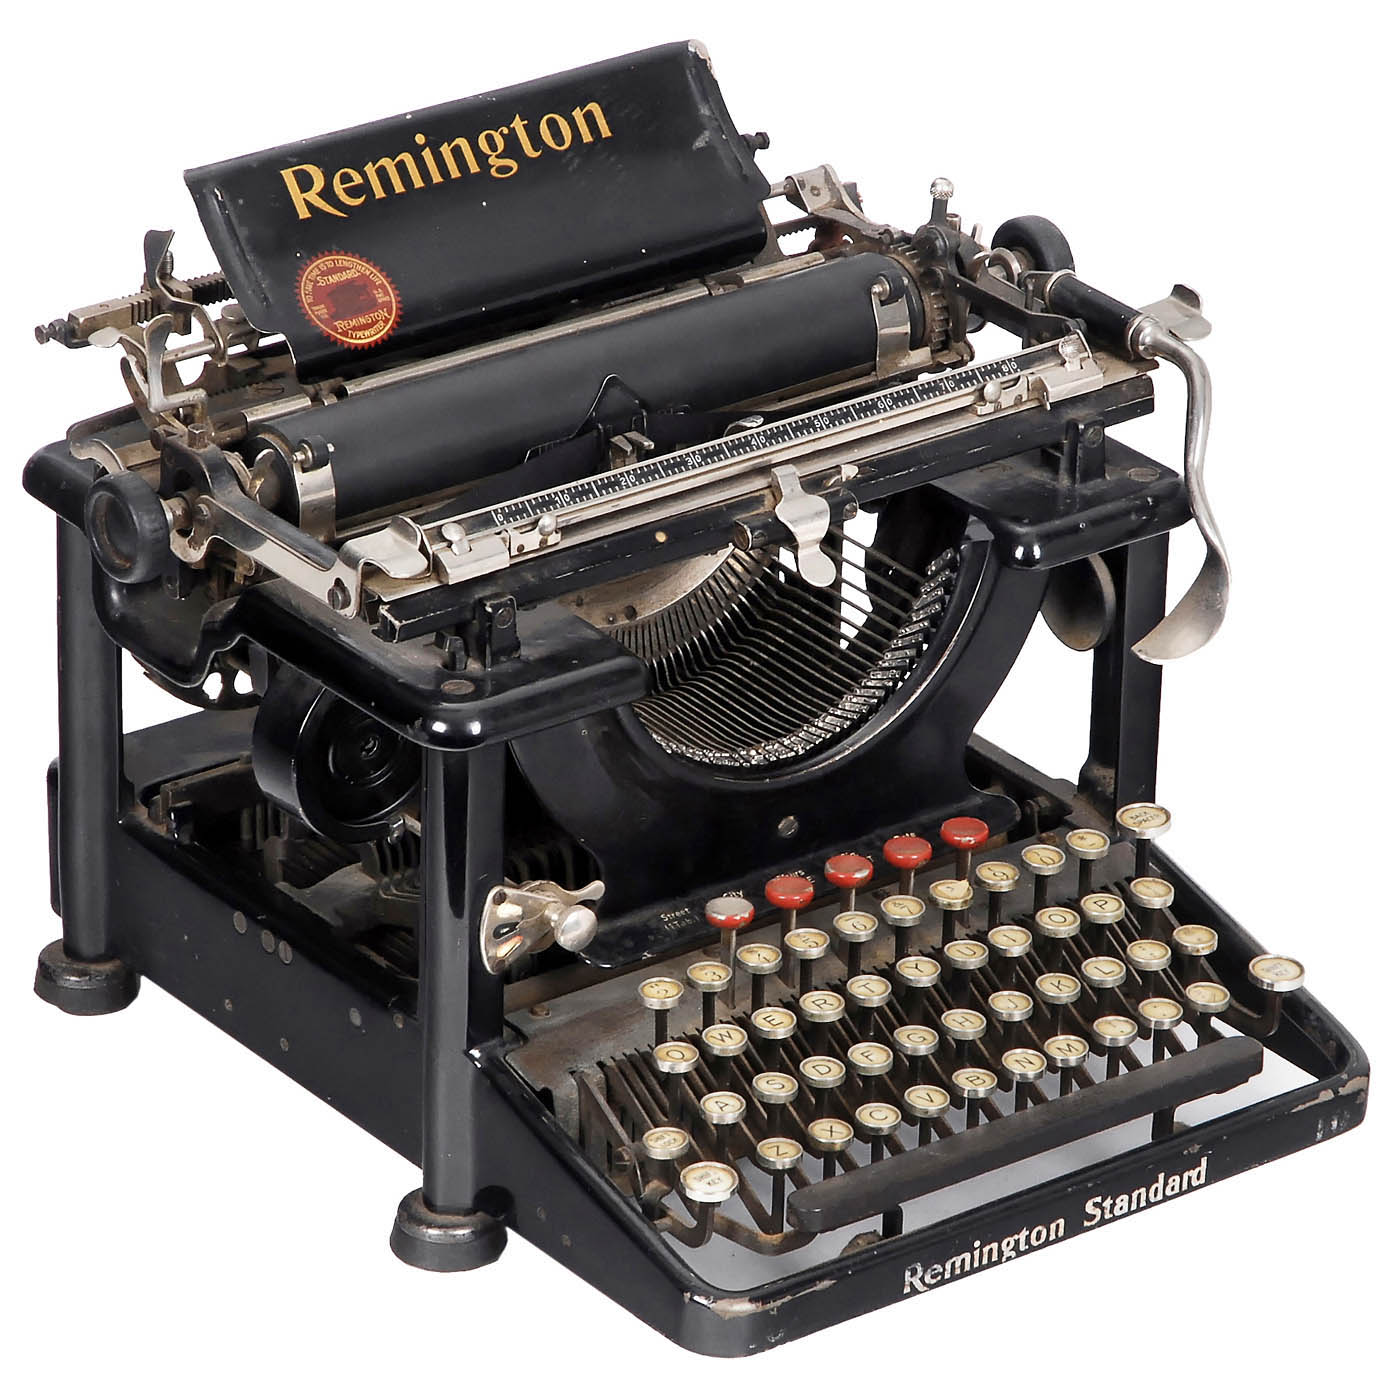 4 Remington Typewriters and 1 Table - Image 3 of 7